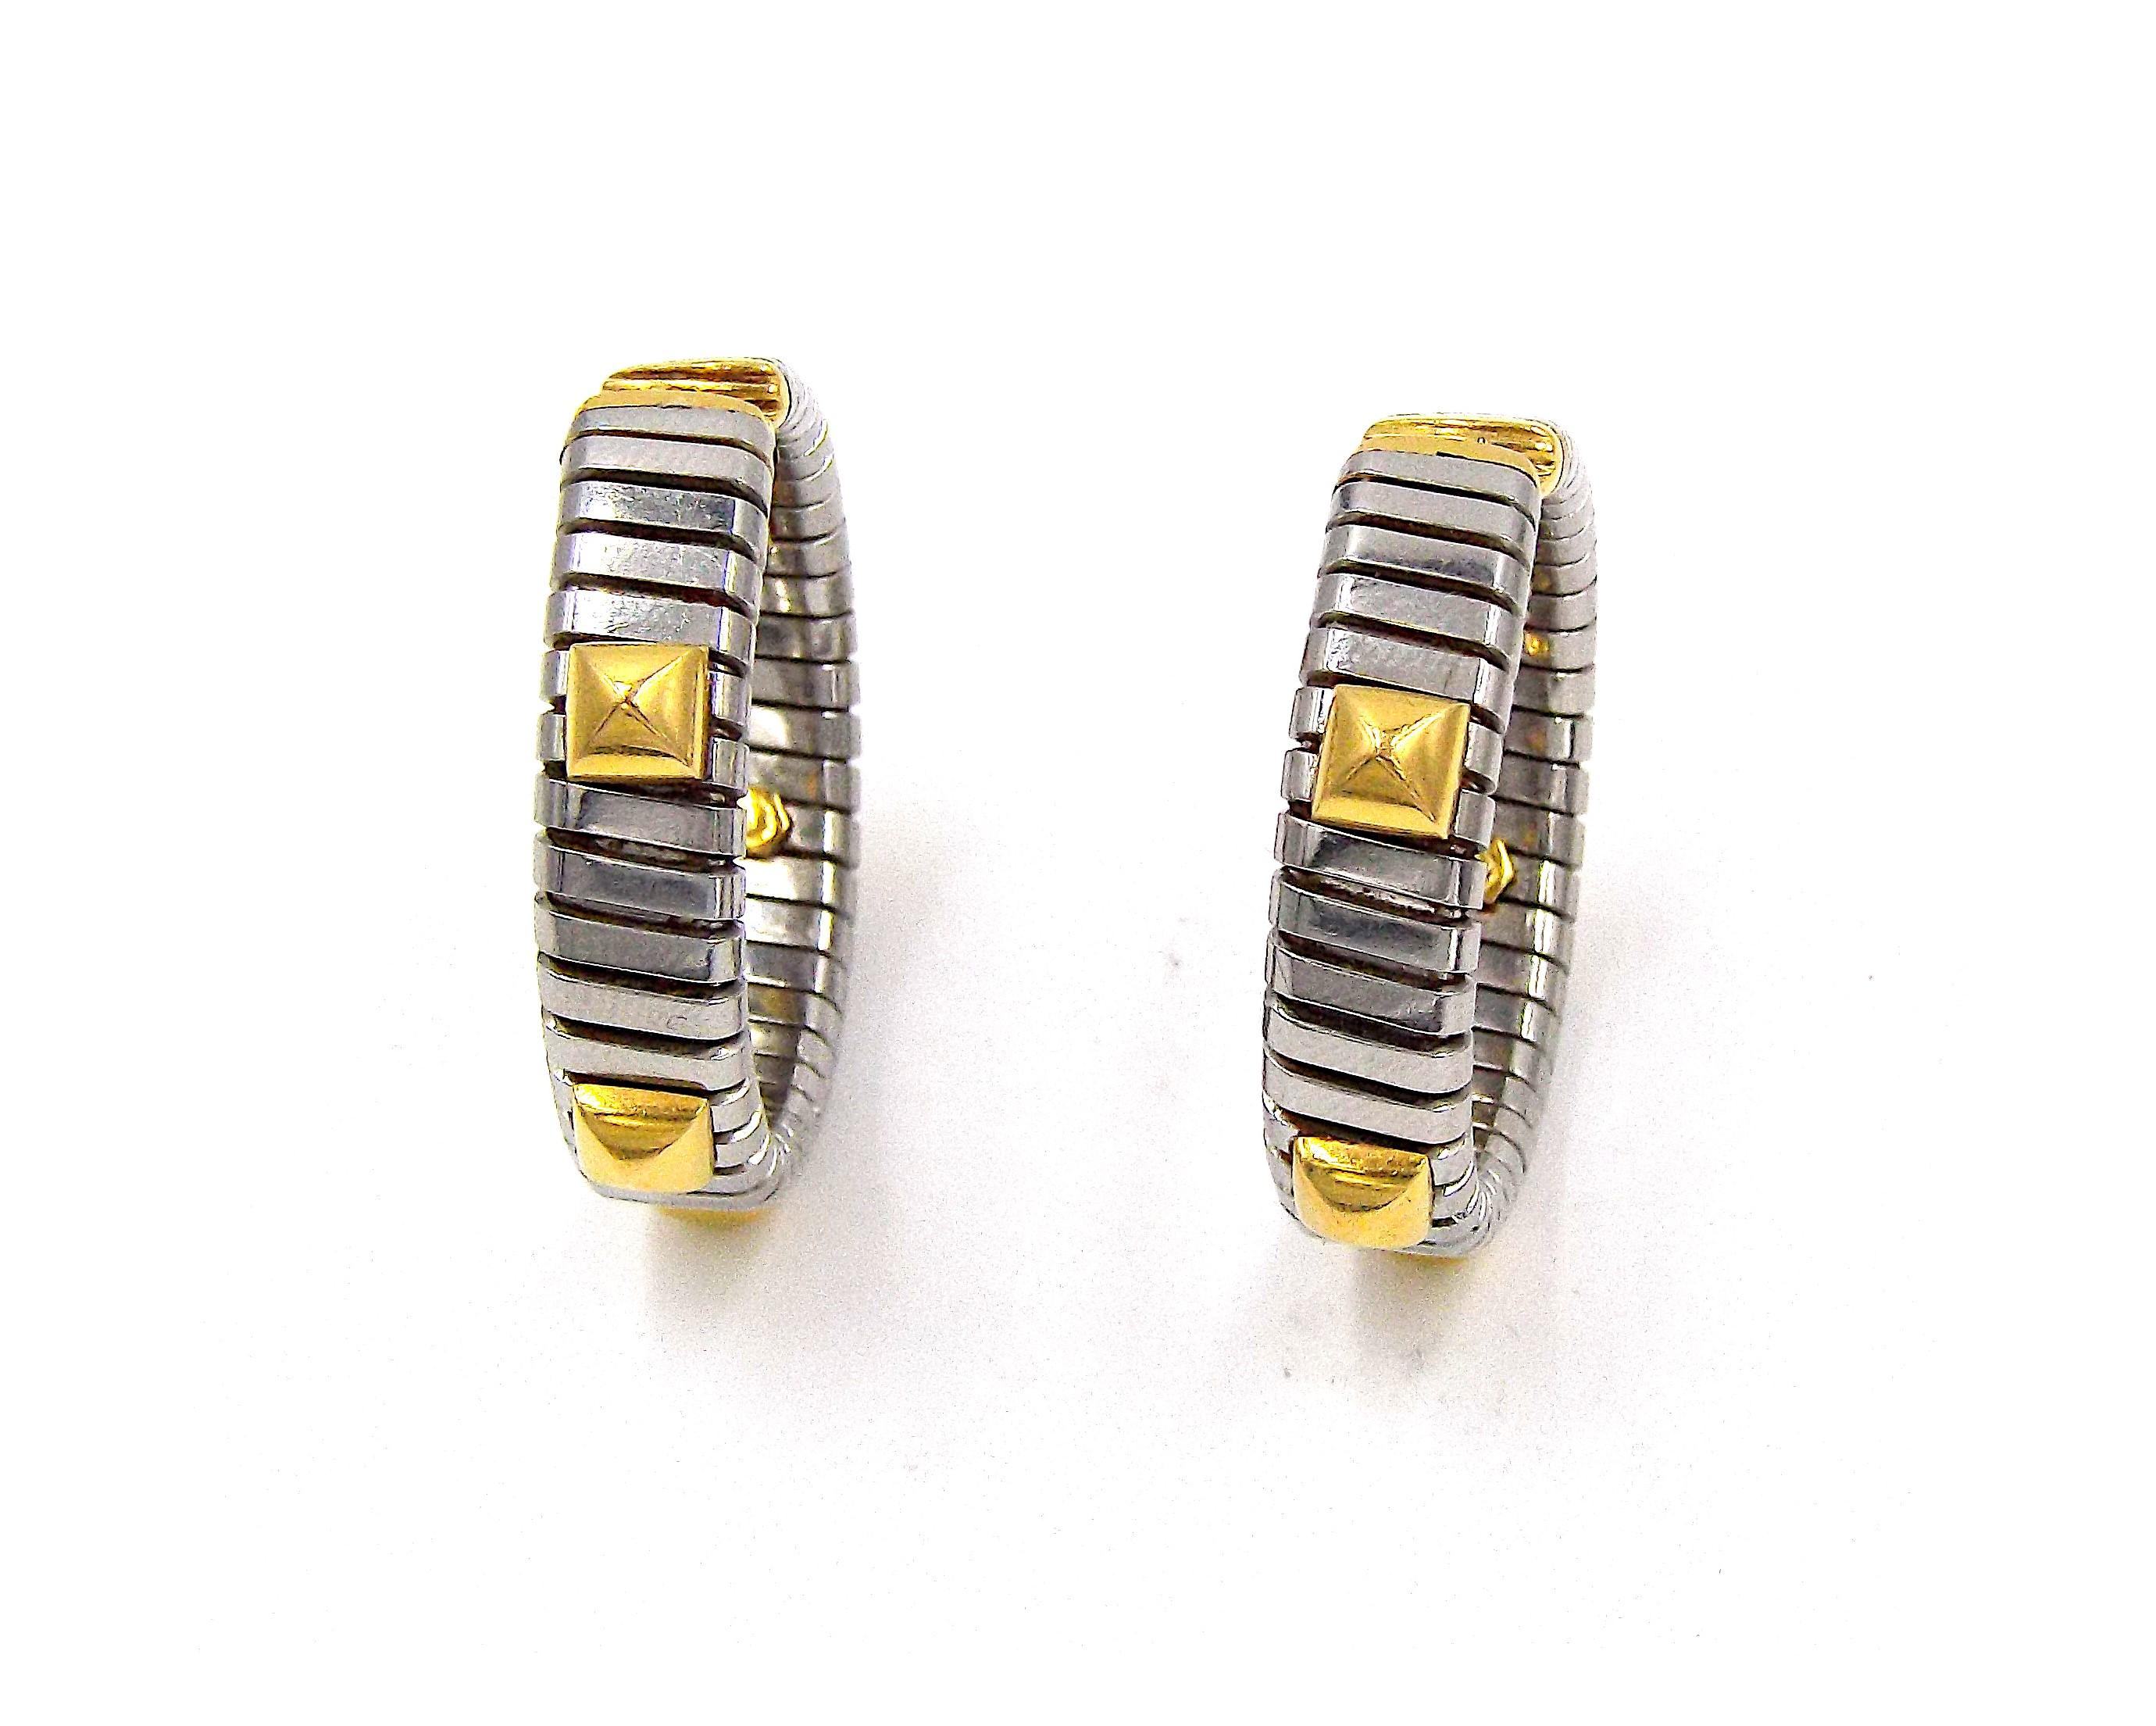 A pair of stainless steel and 18K yellow gold hoop earrings by Bulgari. Gross weight 13.2g each, approximately 1.5